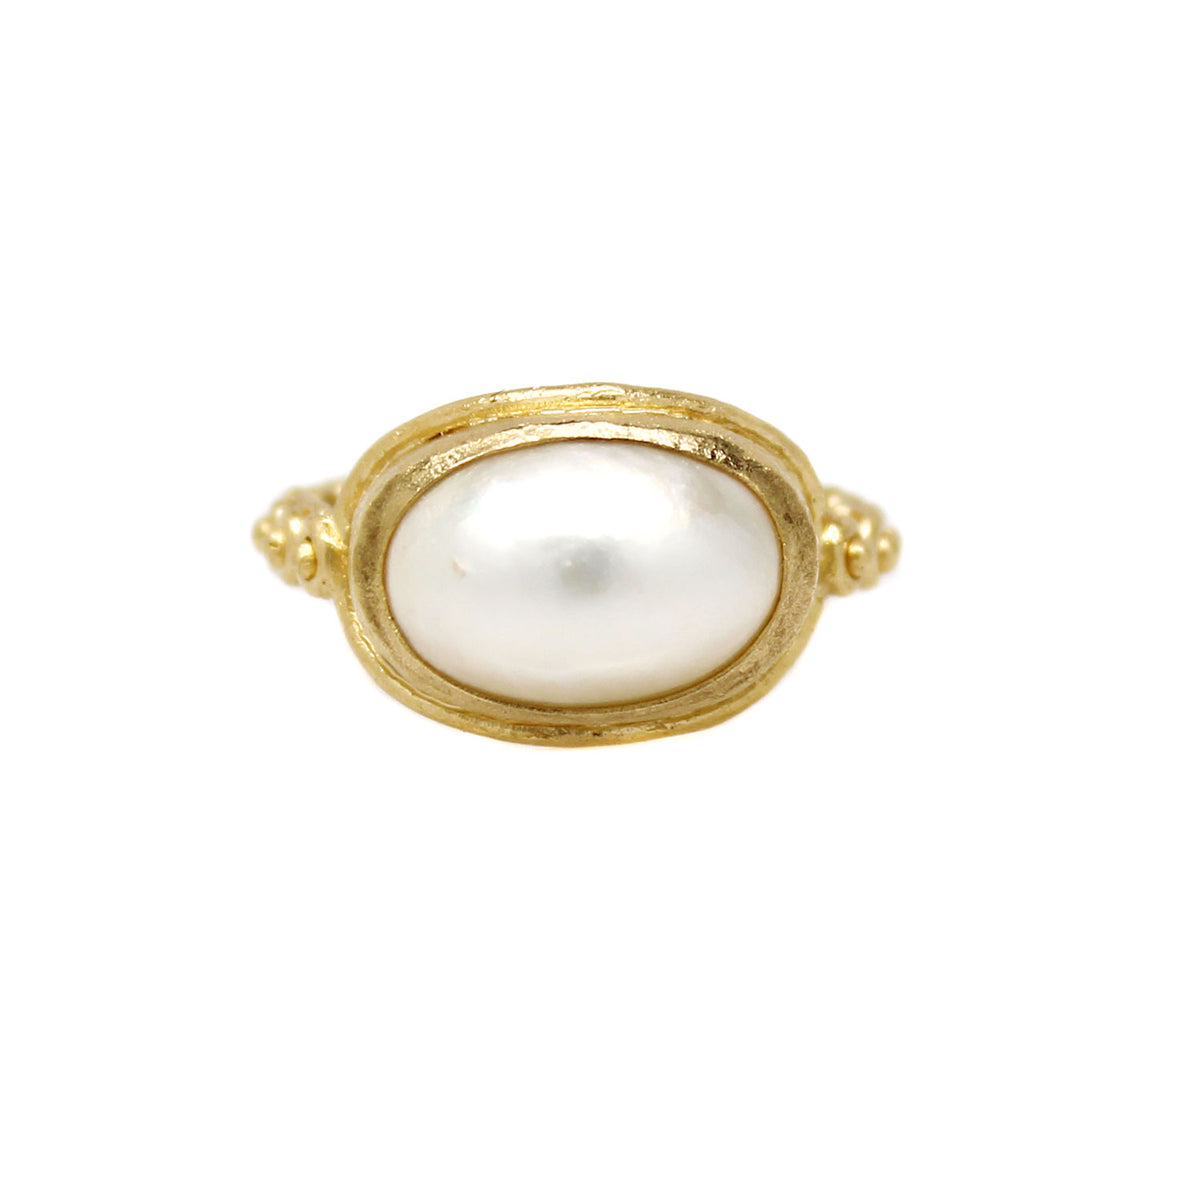 One-of-a-Kind Oval Mabè Pearl Ring